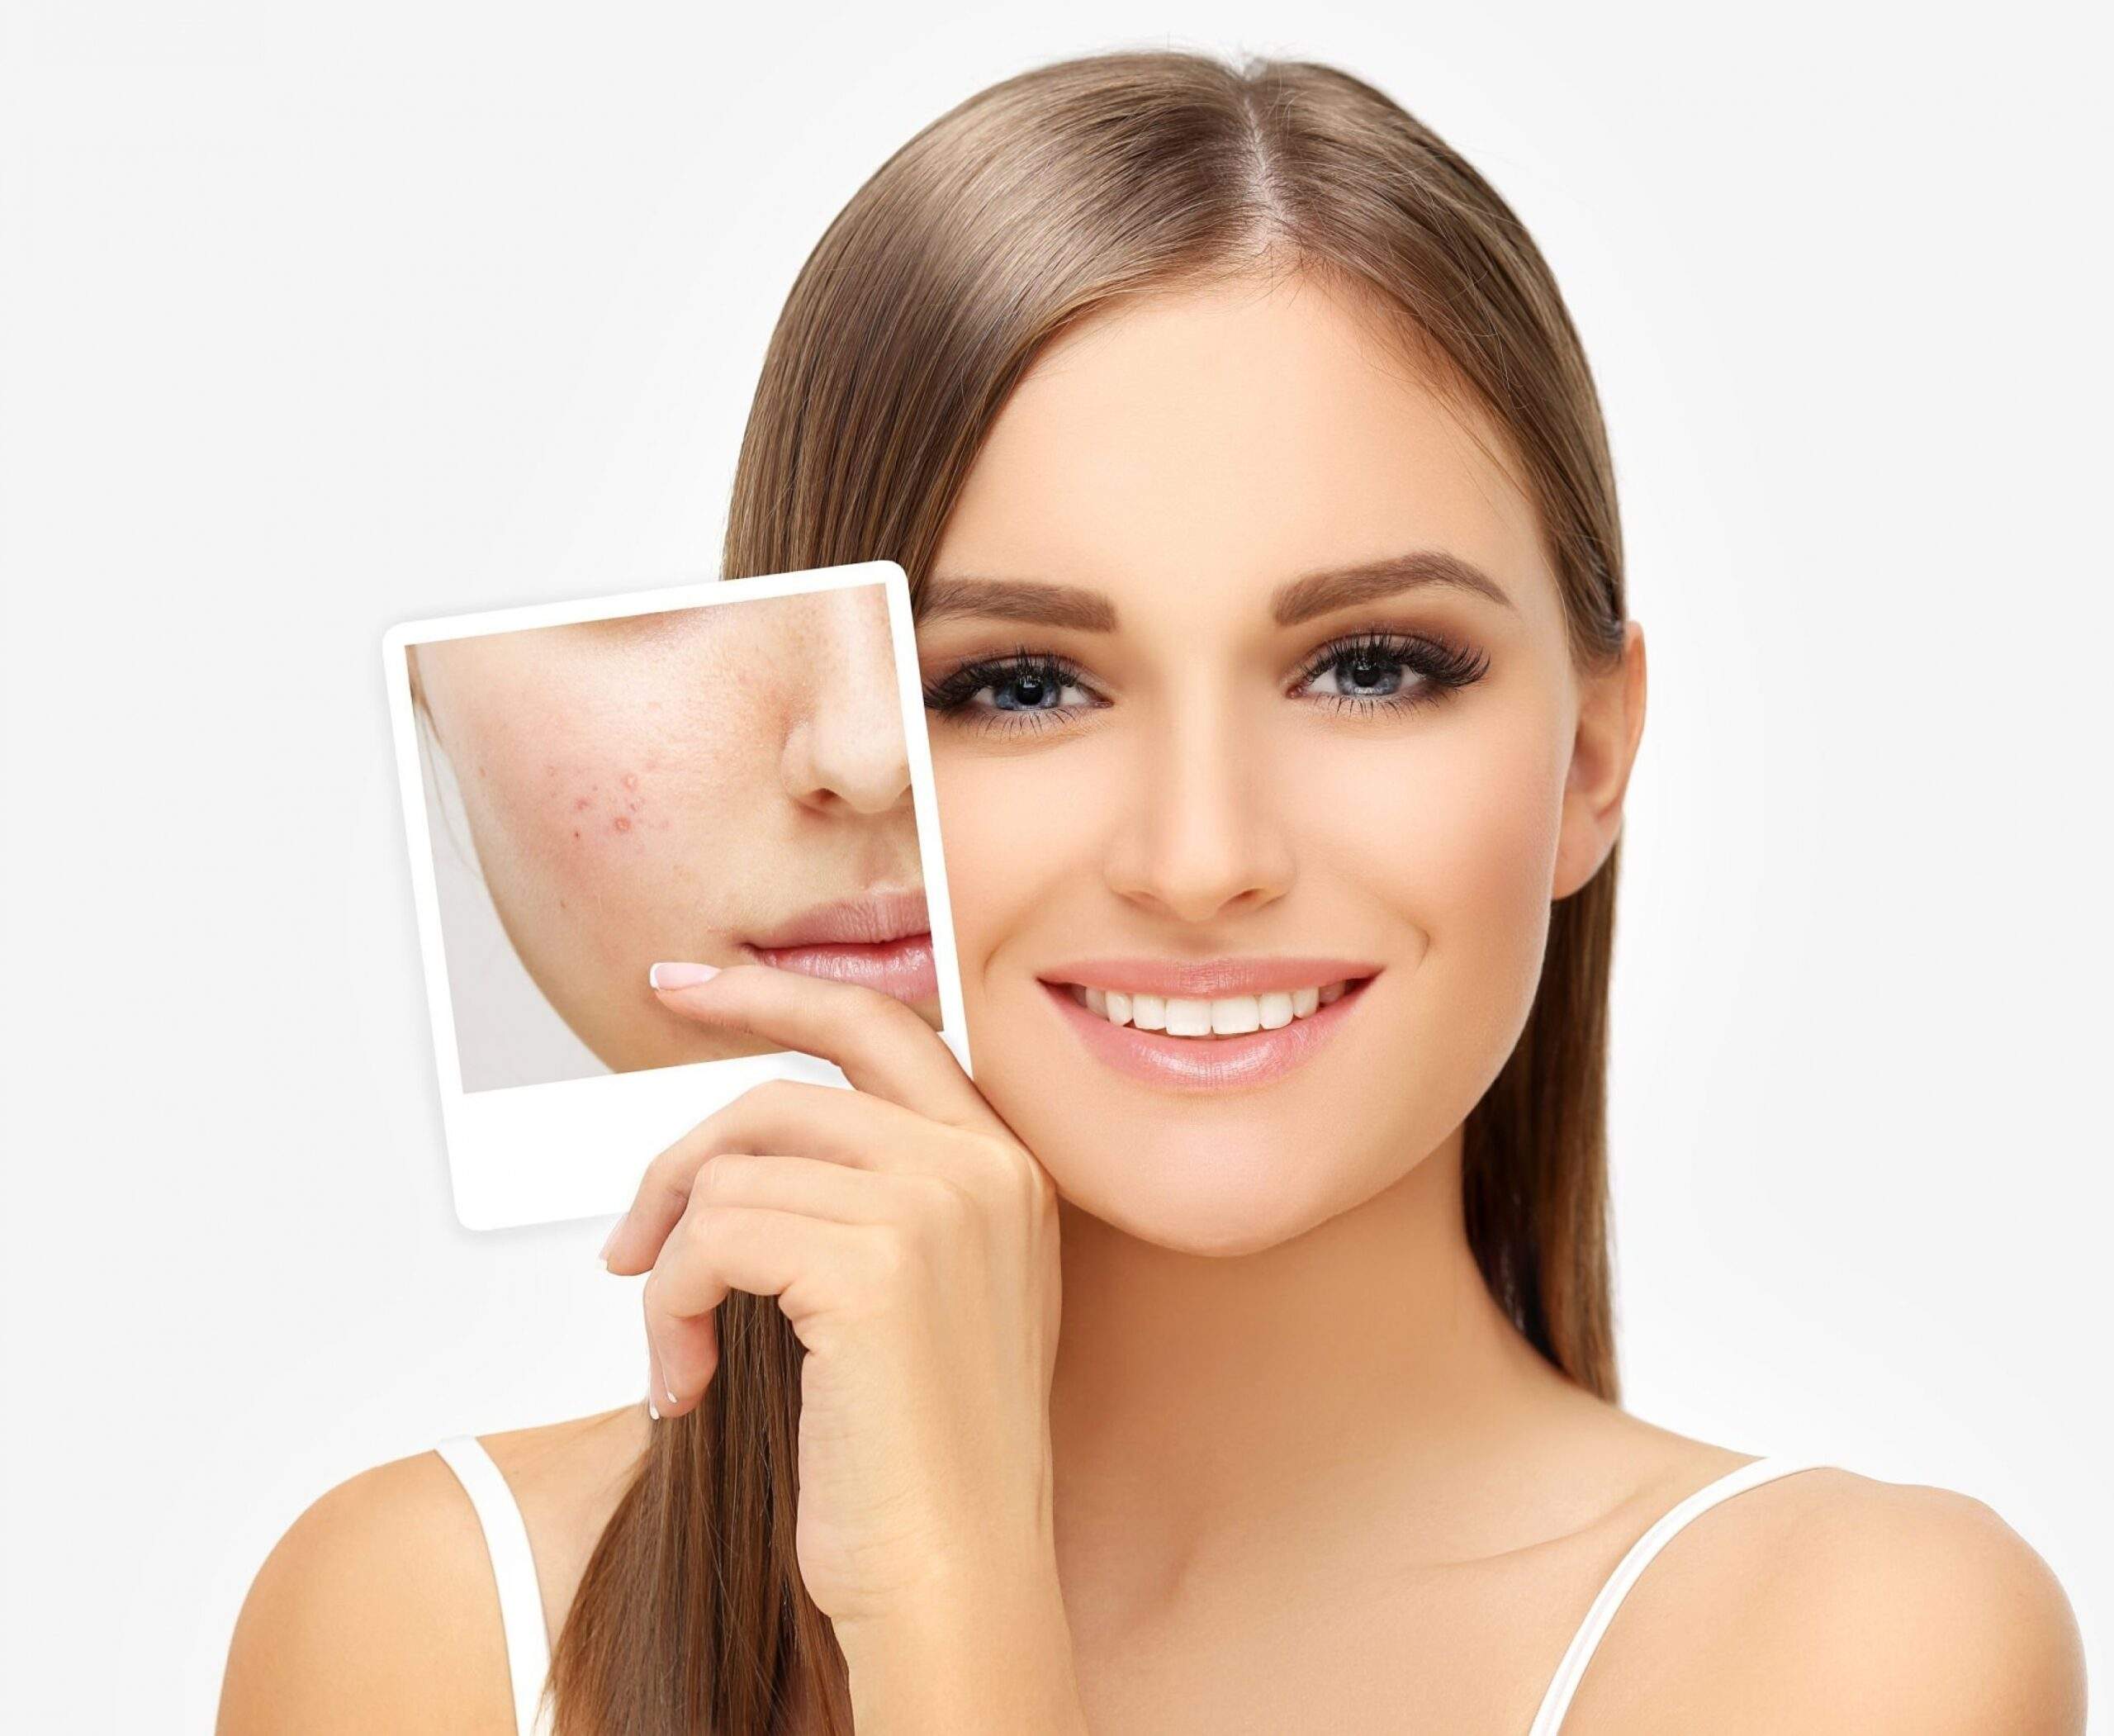 Acne Treatment in Bangalore | Dermatologist for Acne Scars